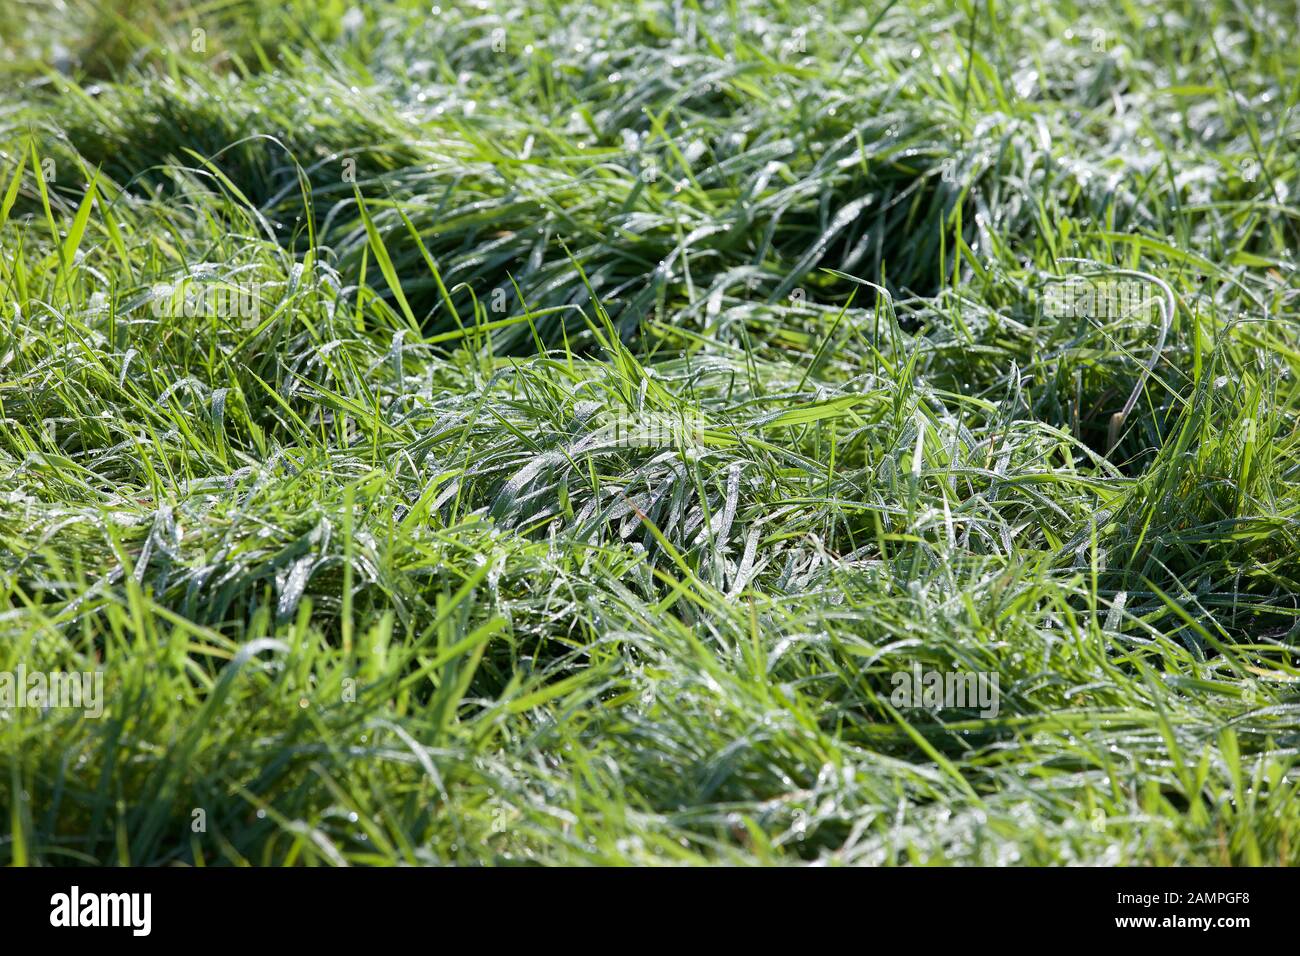 Lush green grass with drops of dew. Stock Photo